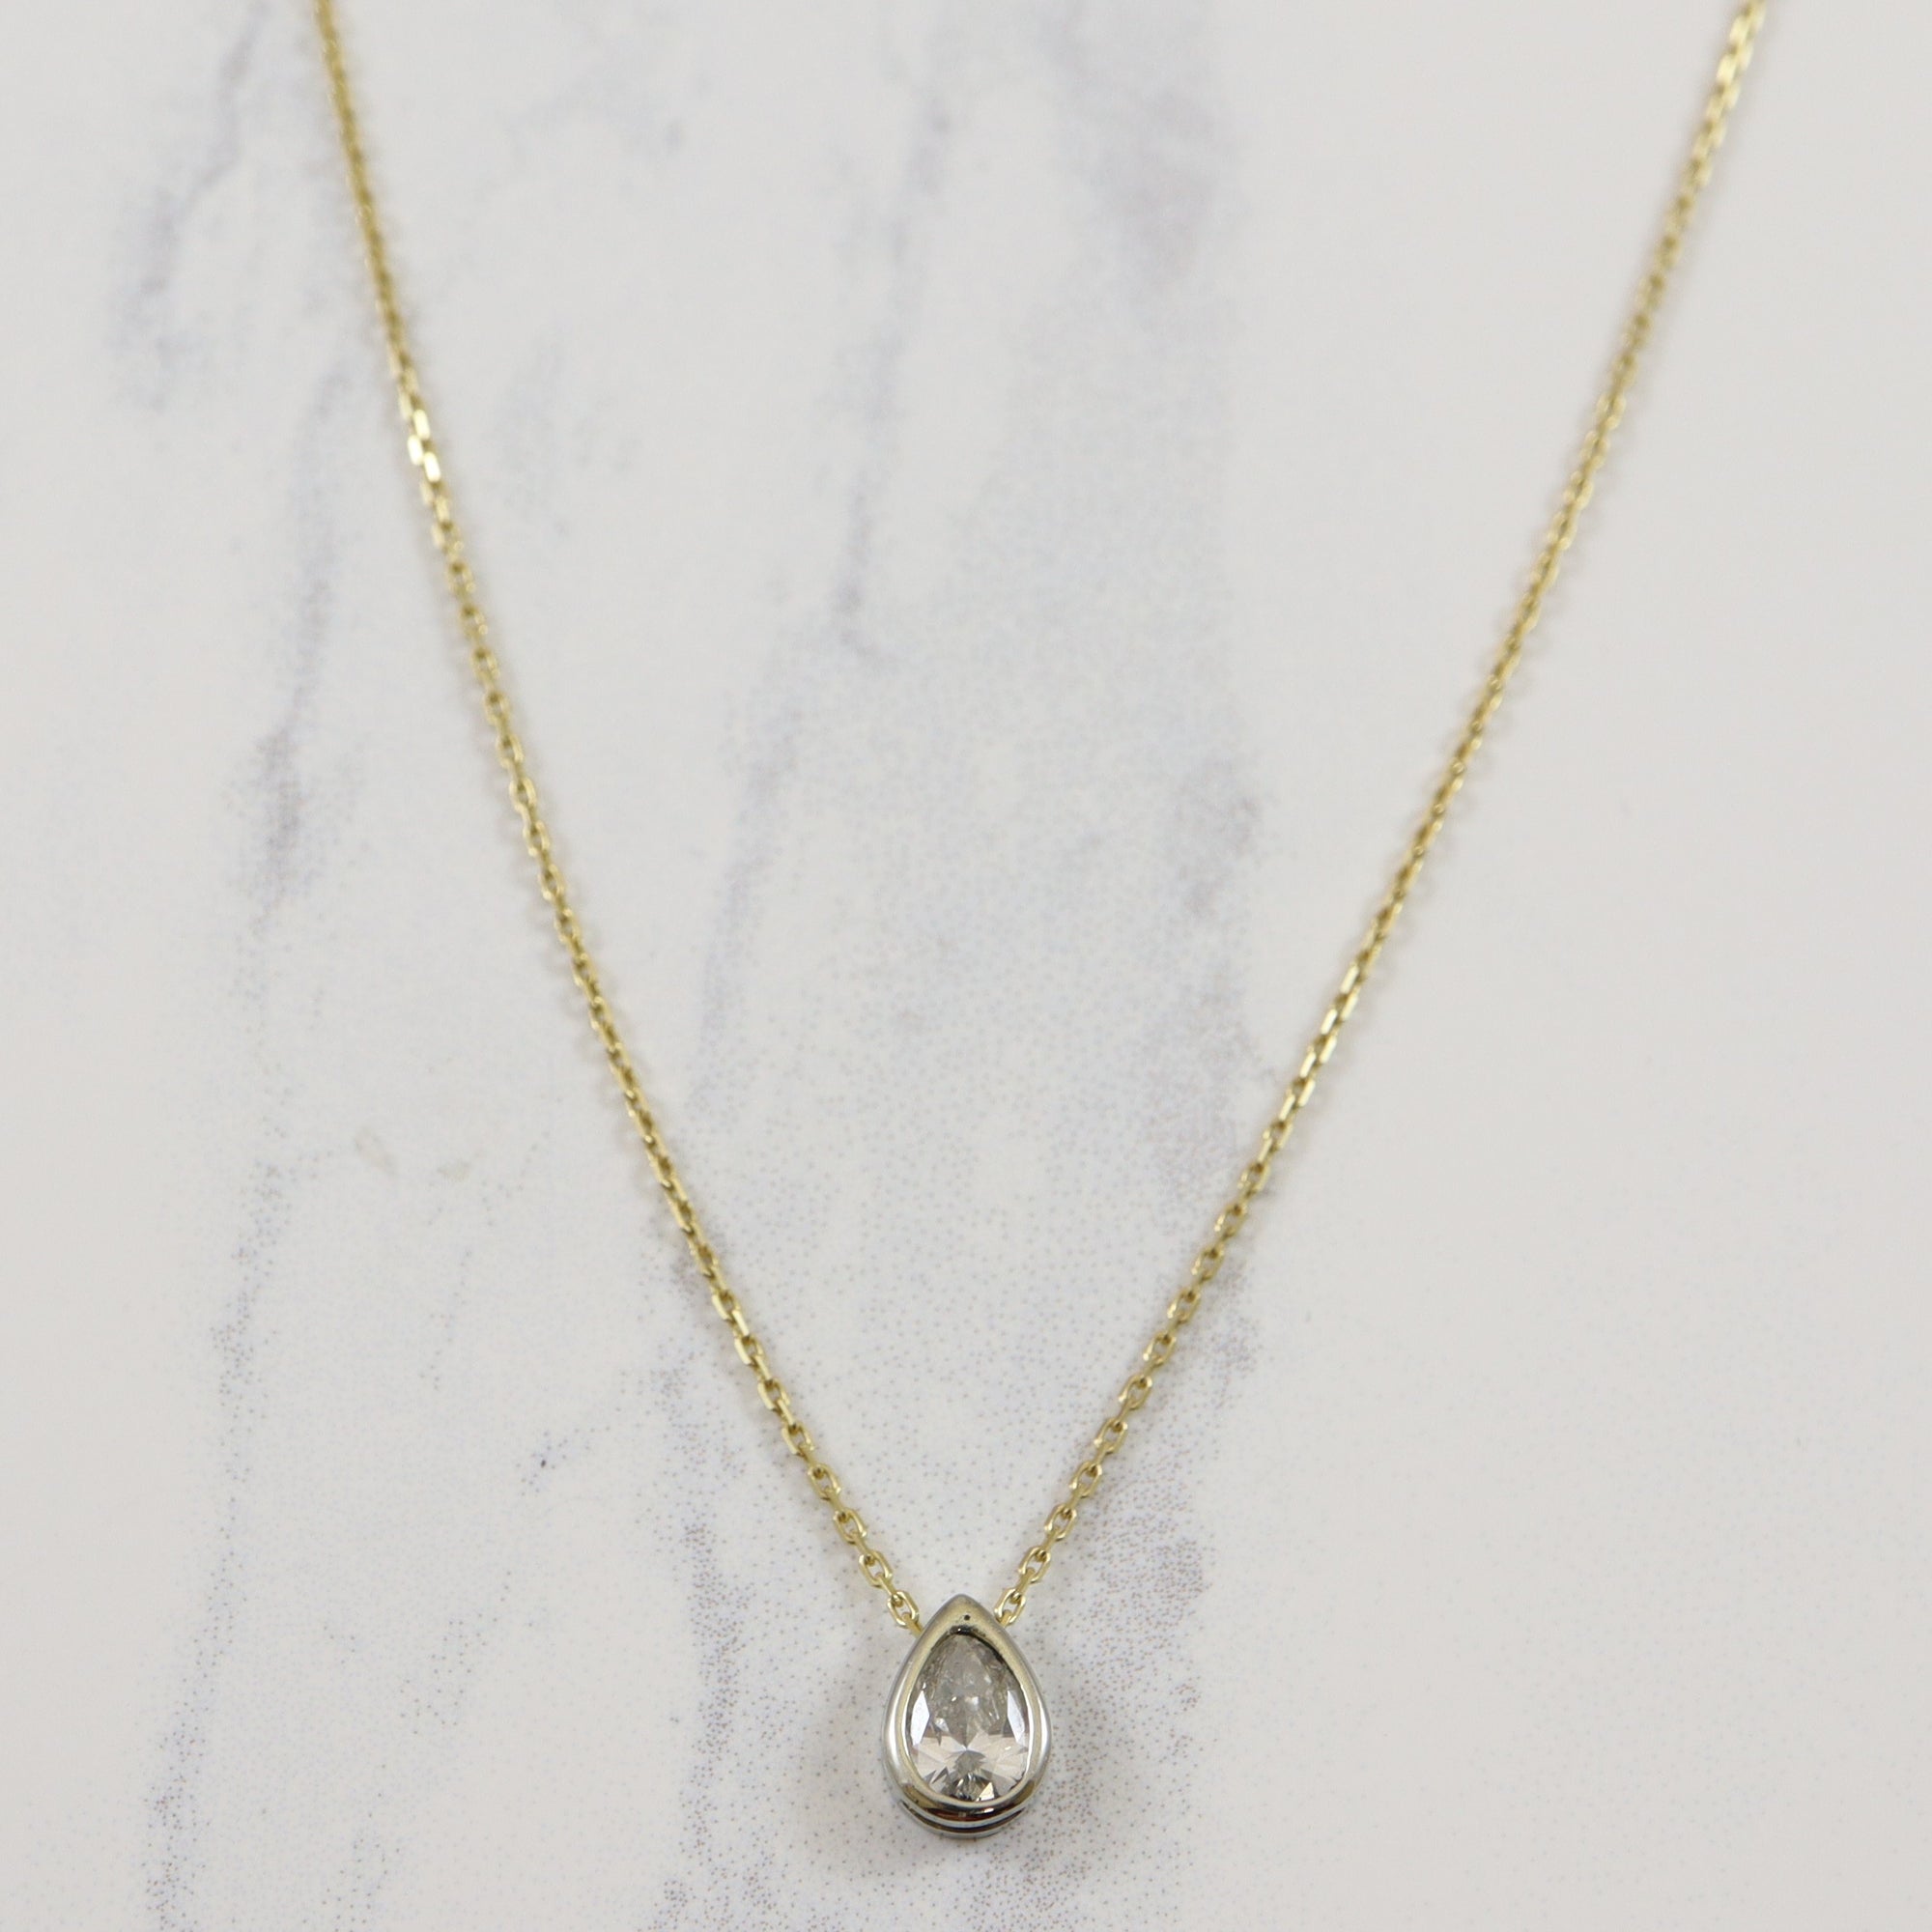 Floating Pear Cut Diamond Necklace | 0.51ct | 16